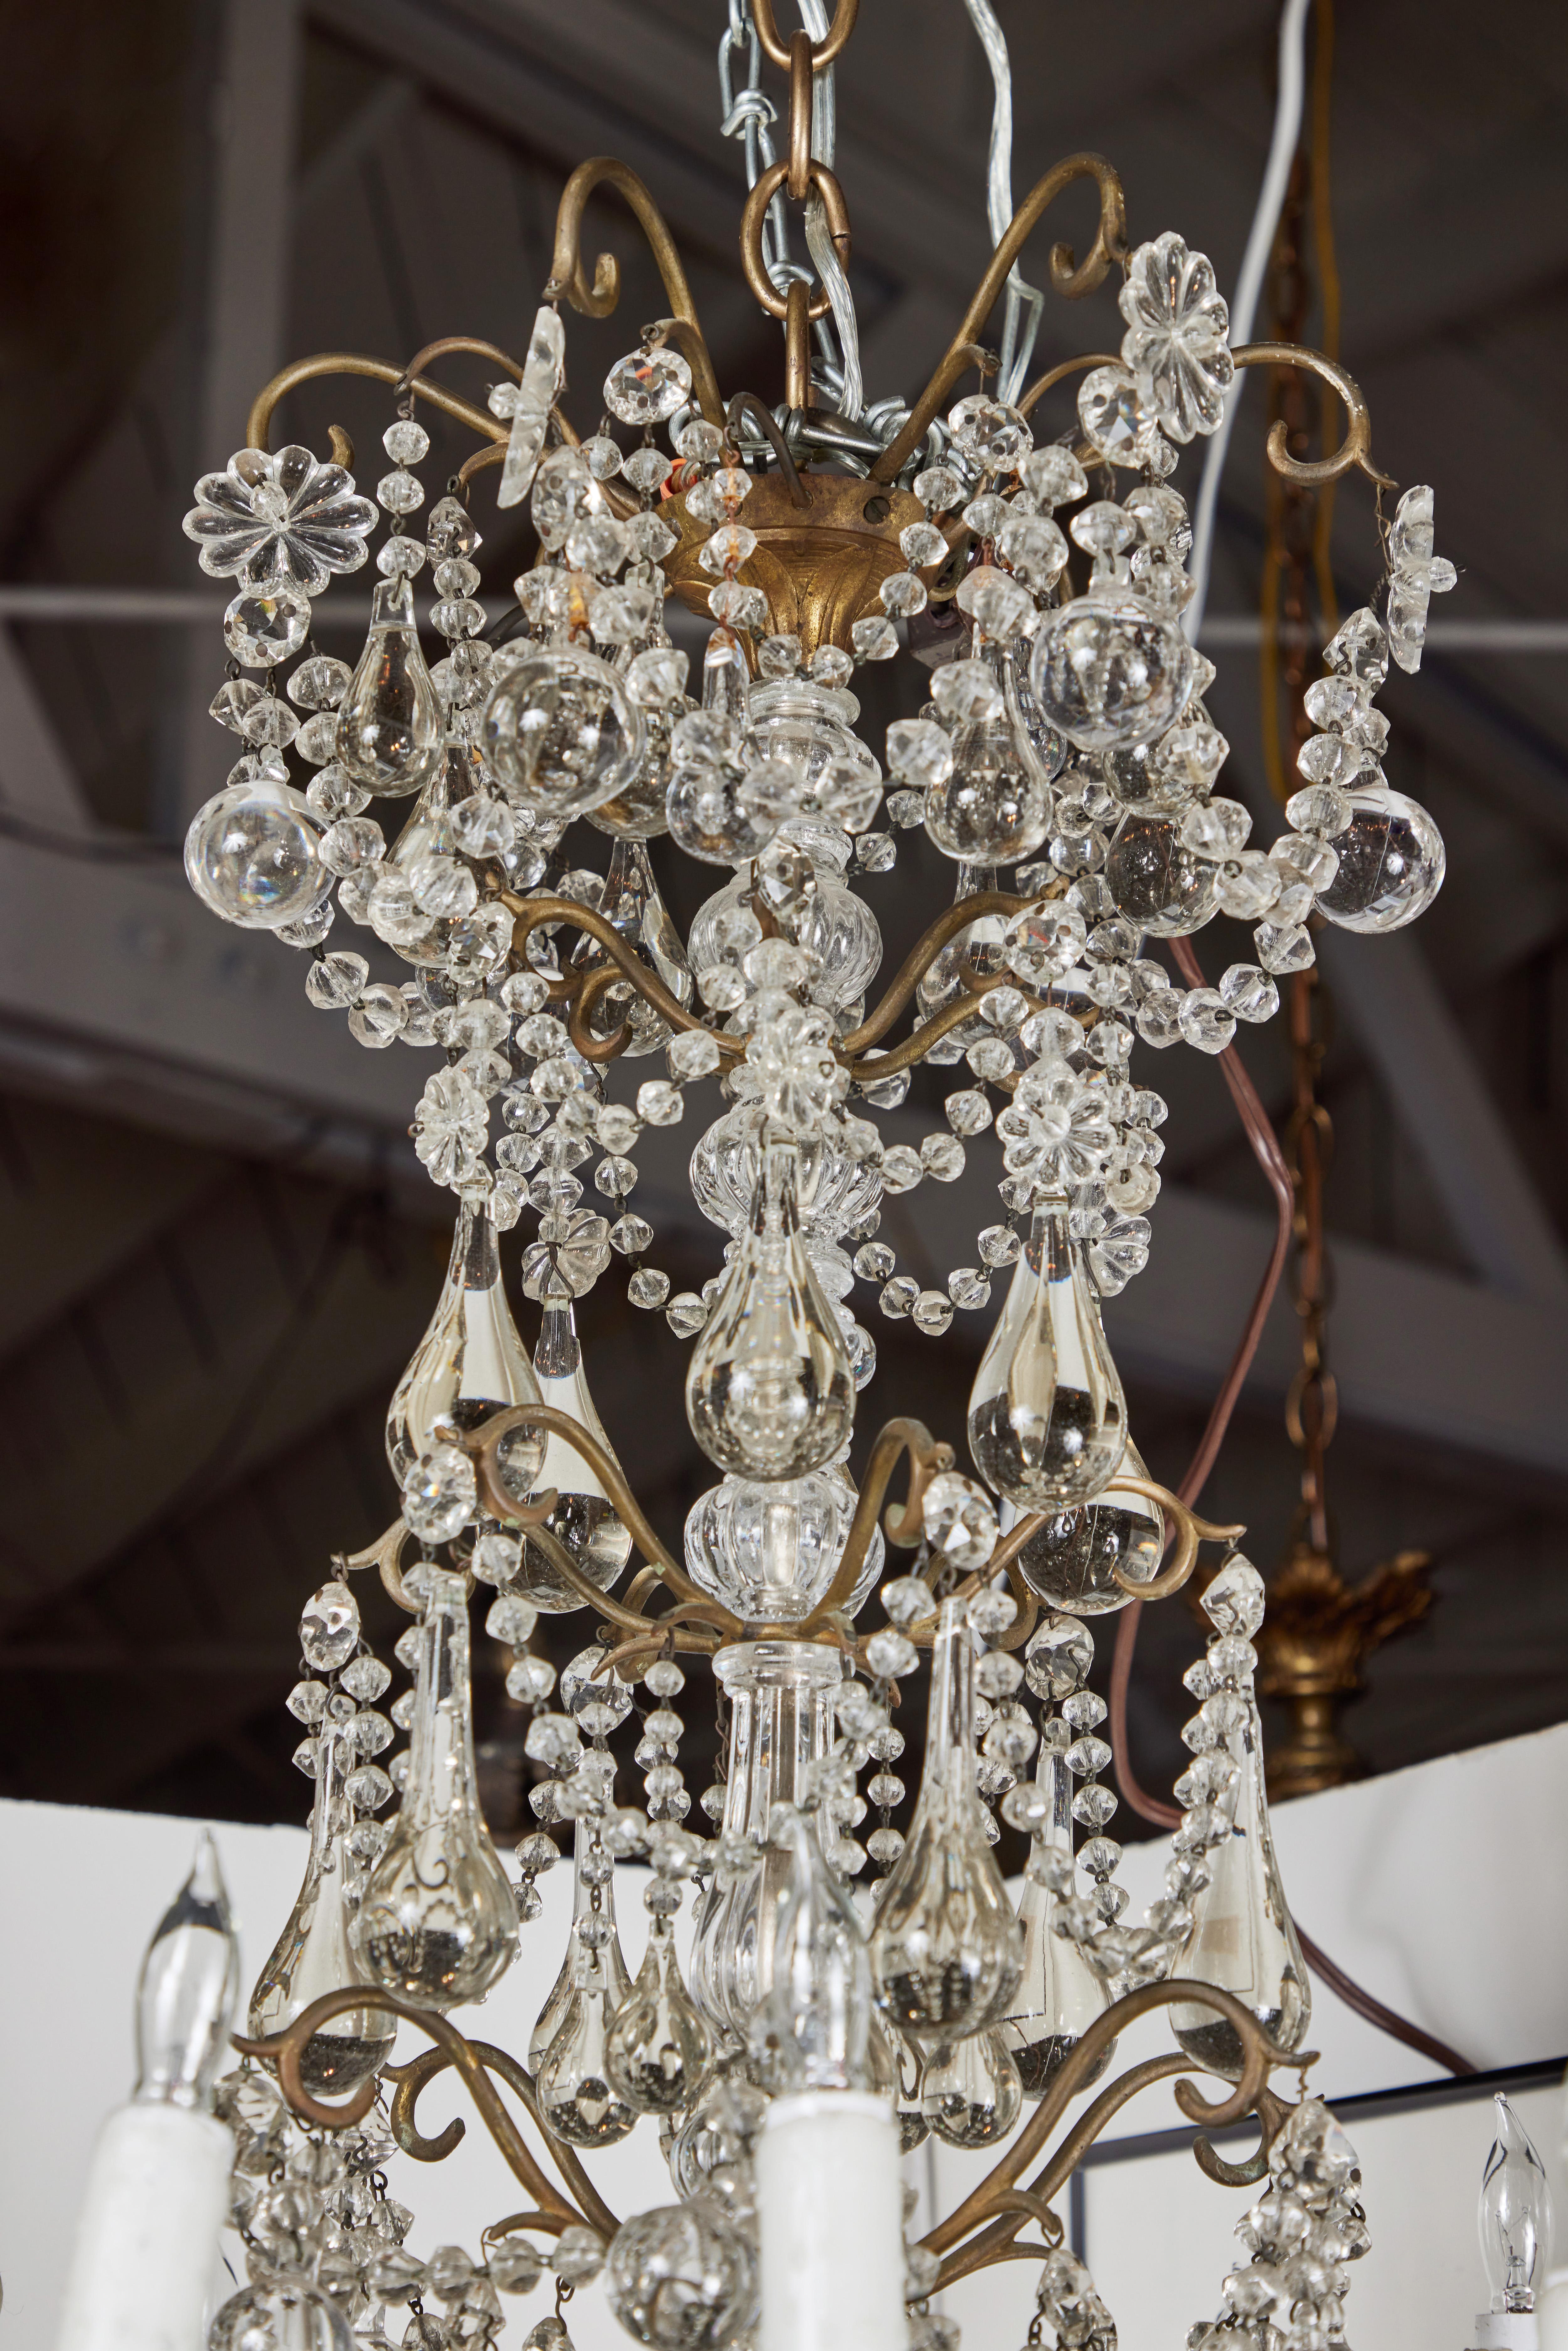 Early 20th Century c. 1920, Italian, Crystal Chandelier For Sale